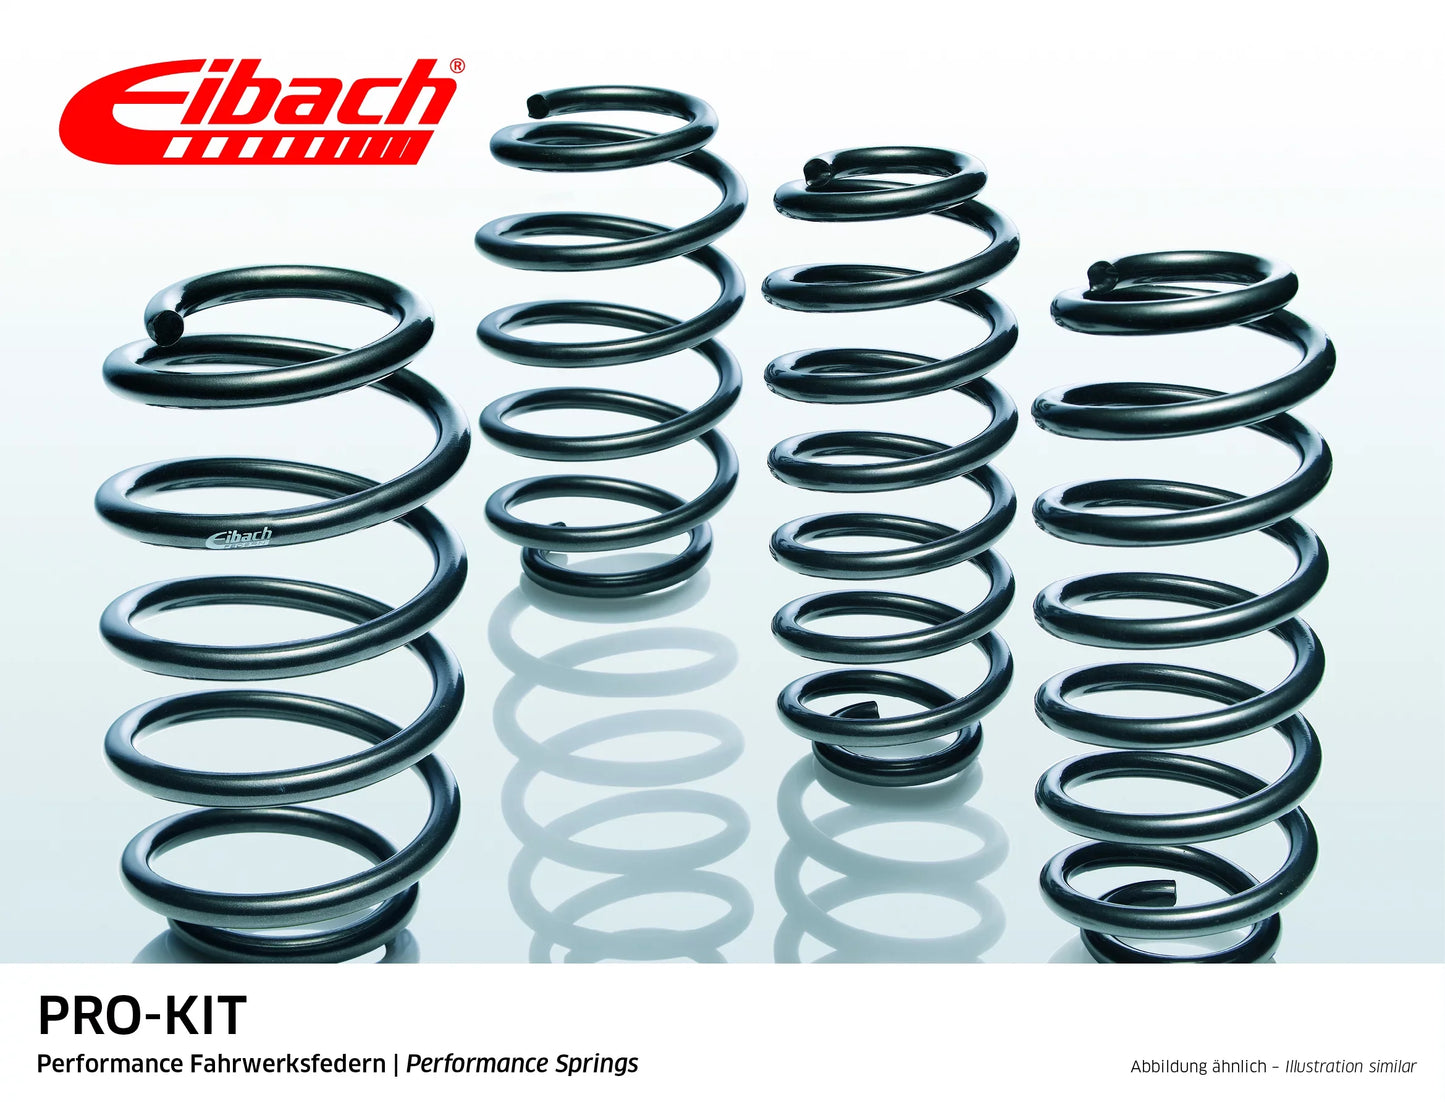 Eibach Pro-Kit Lowering Springs (E10-20-001-09-22) at £257.82